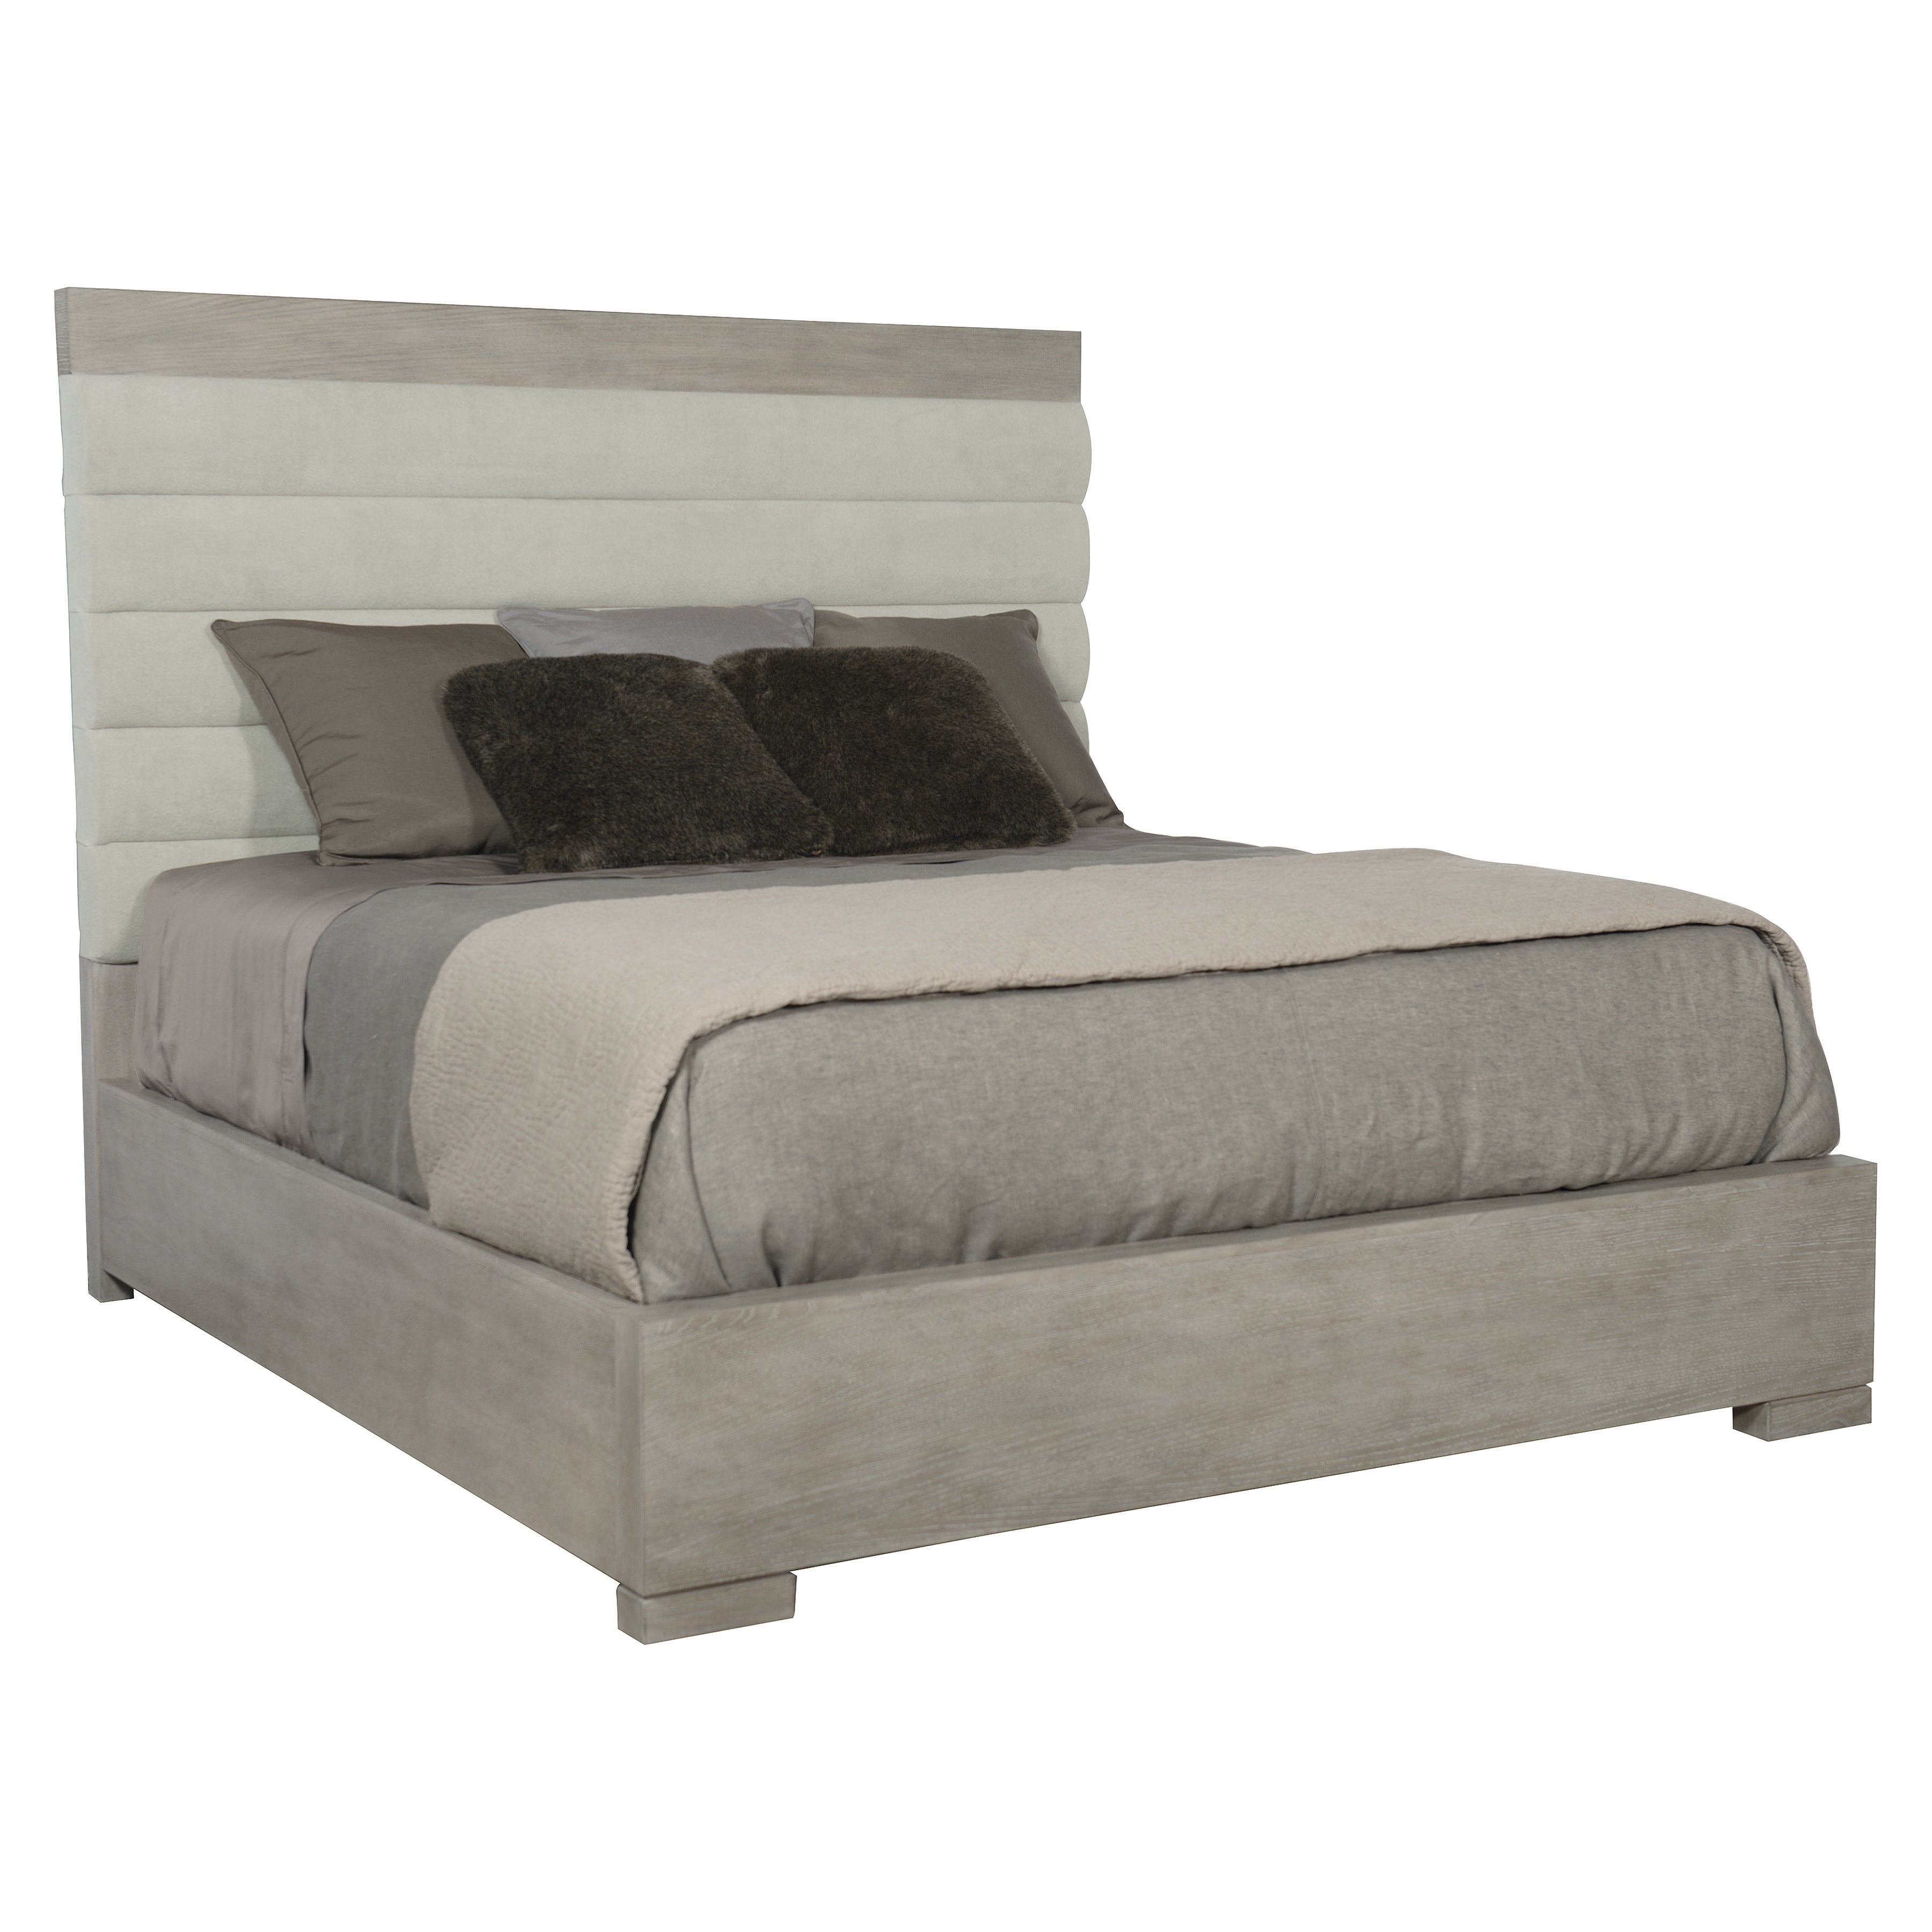 Linea Upholstered Queen Panel Bed with Wooden Footboard and Side Rails